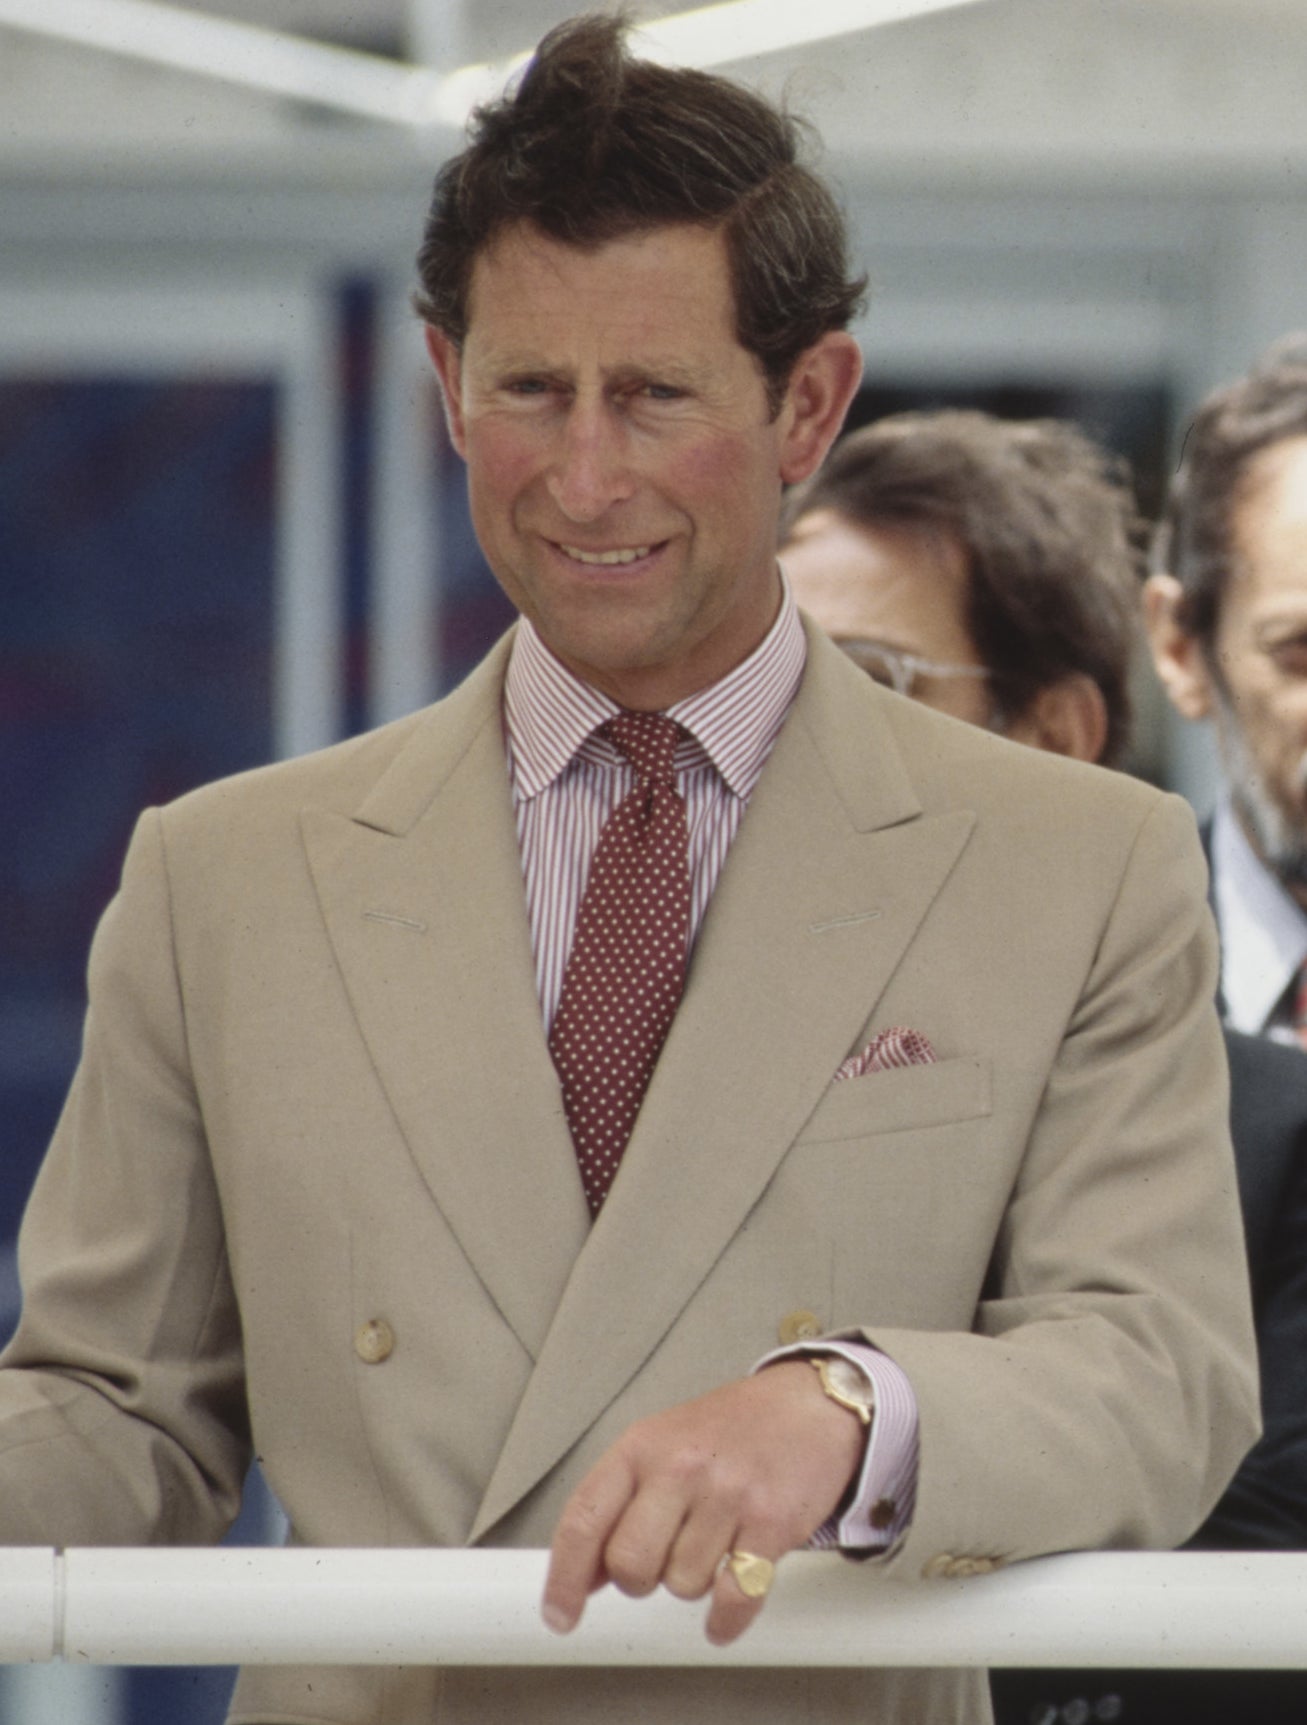 Prince Charles in a tan suit and polka dot tie